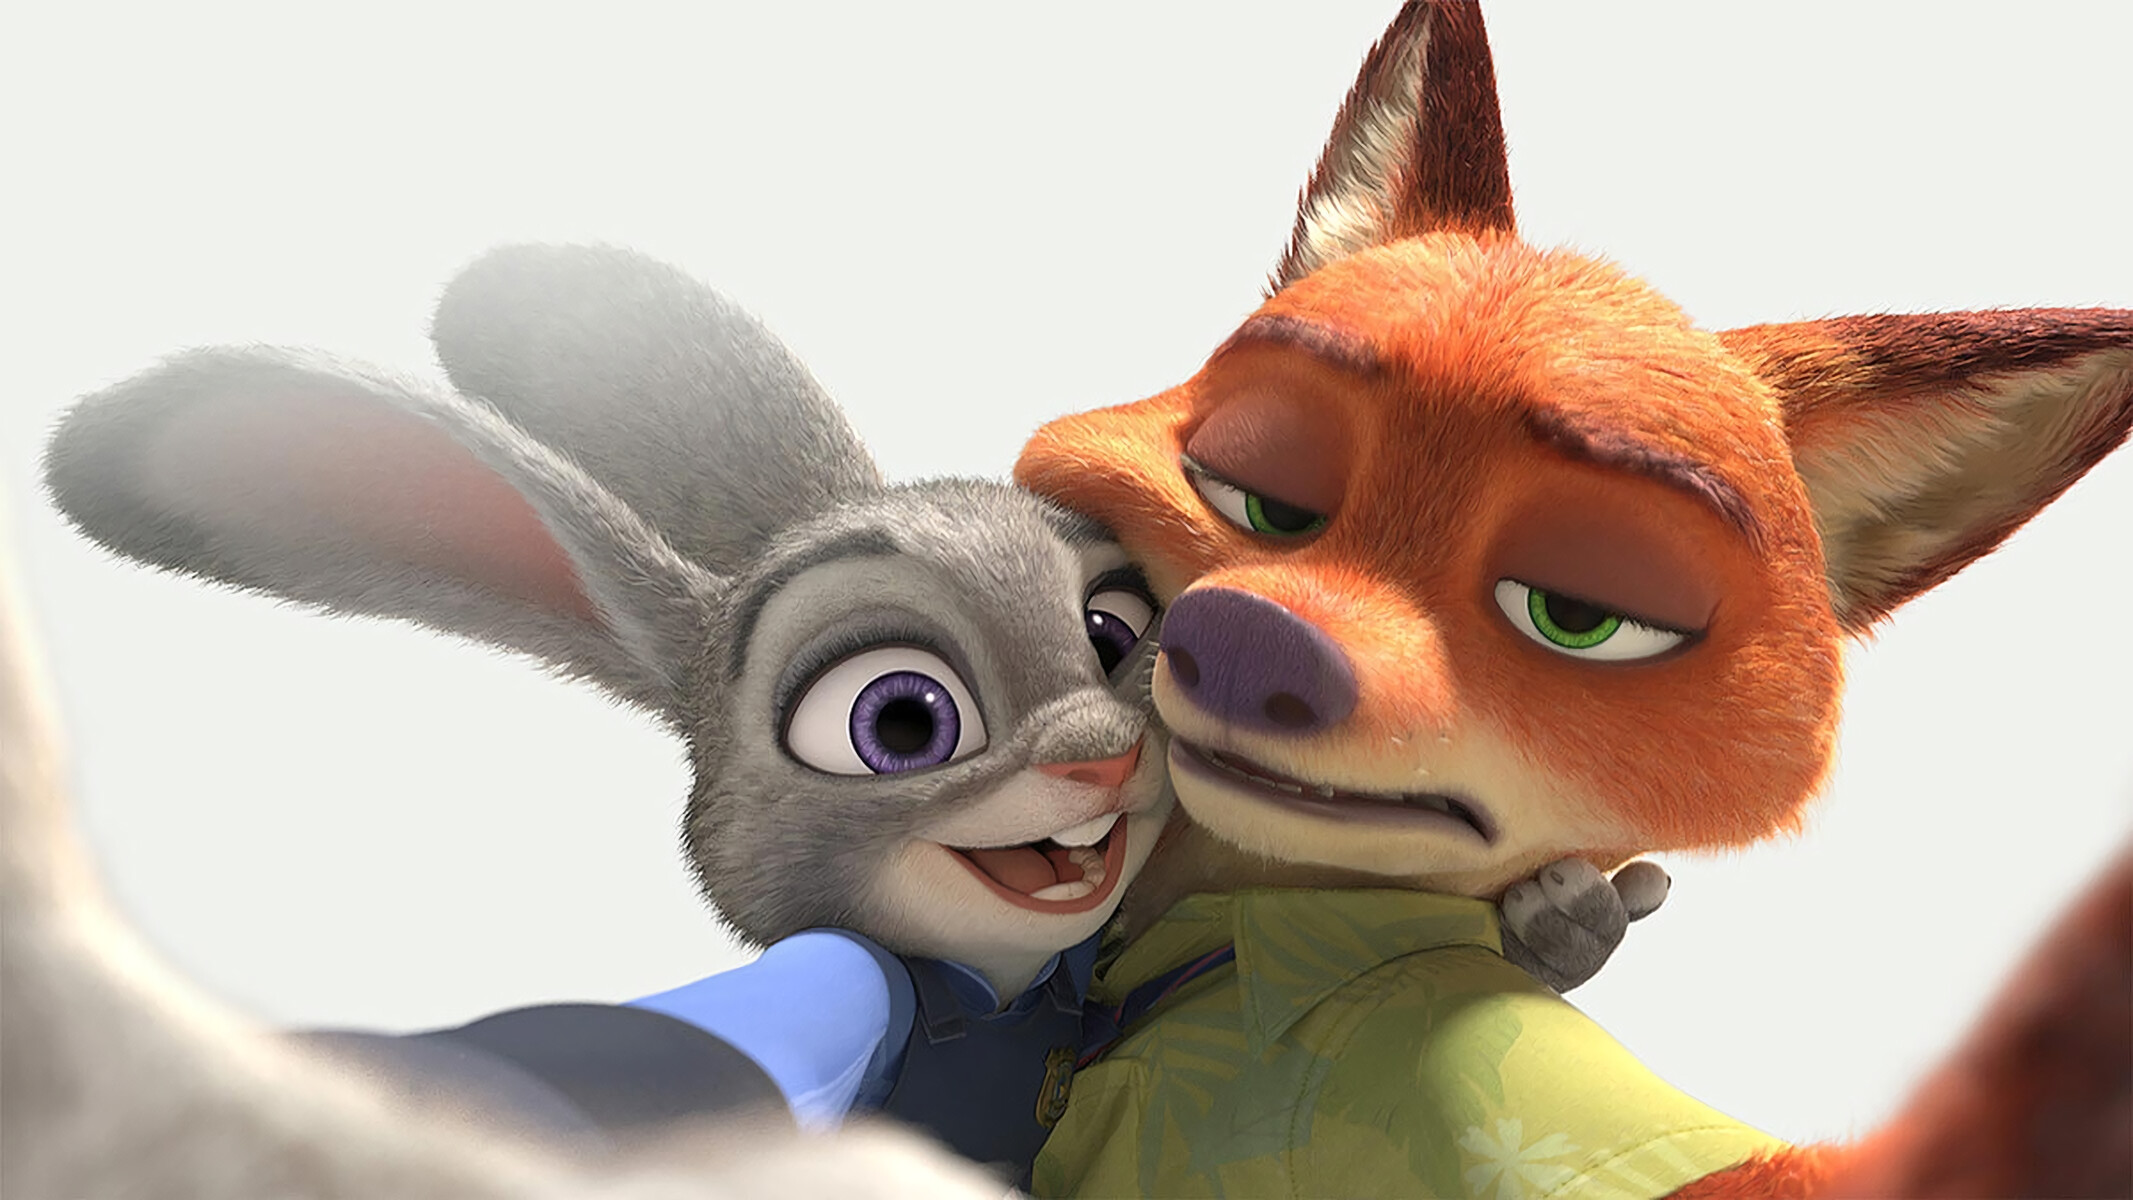 Zootopia: In a city of anthropomorphic animals, a rookie bunny cop and a cynical con artist fox must work together to uncover a conspiracy. 2140x1200 HD Wallpaper.